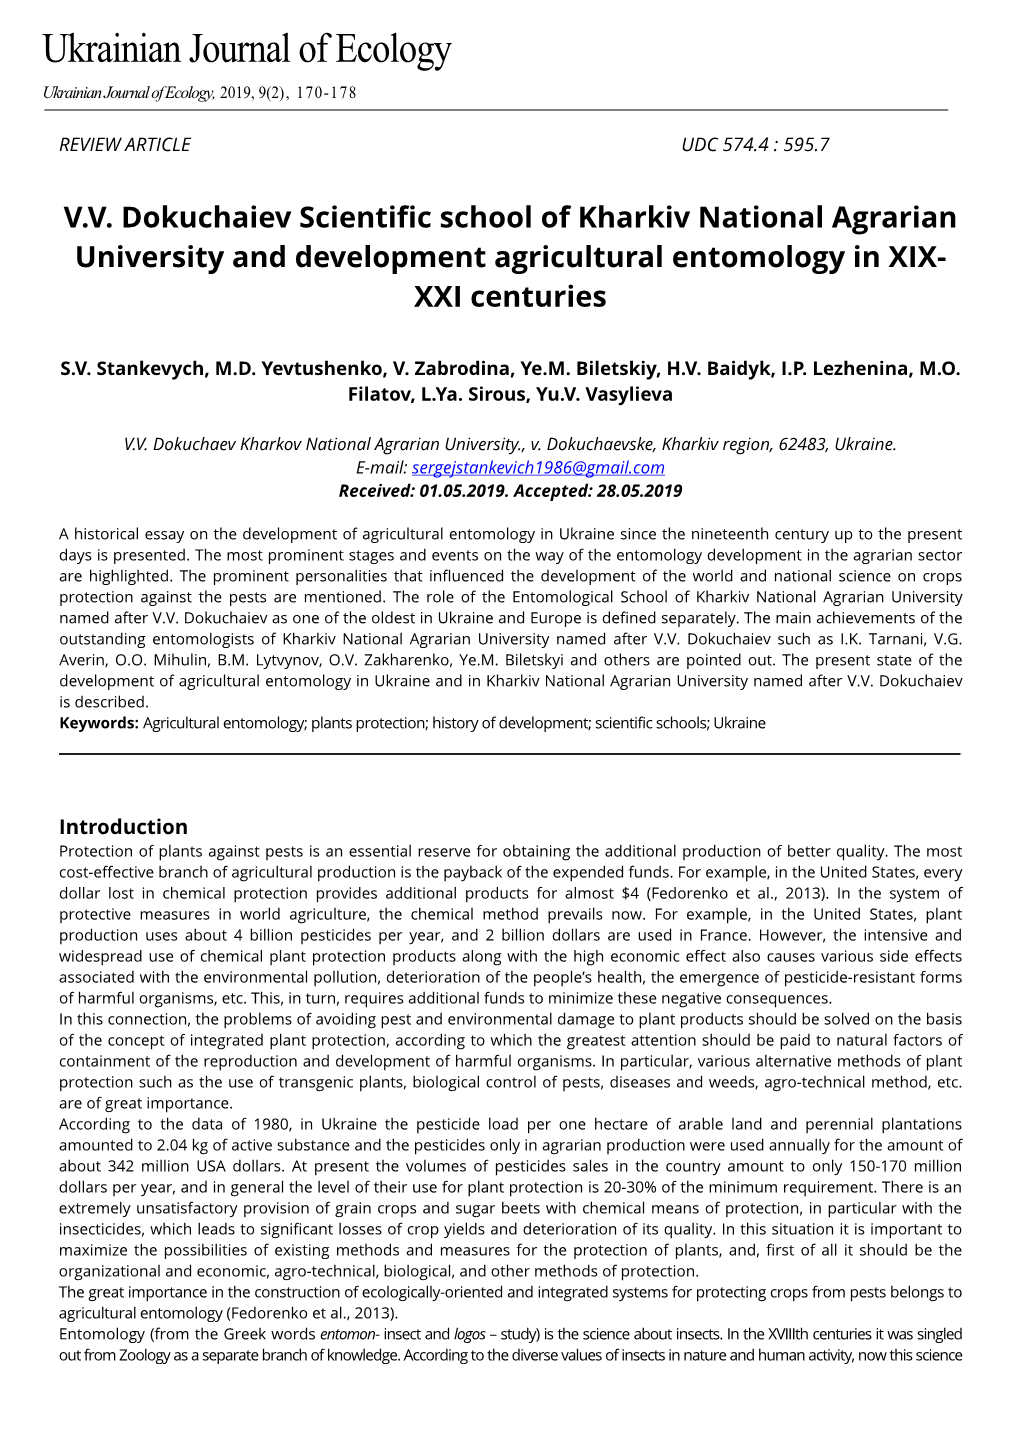 V.V. Dokuchaiev Scientific School of Kharkiv National Agrarian University and Development Agricultural Entomology in XIX- XXI Centuries